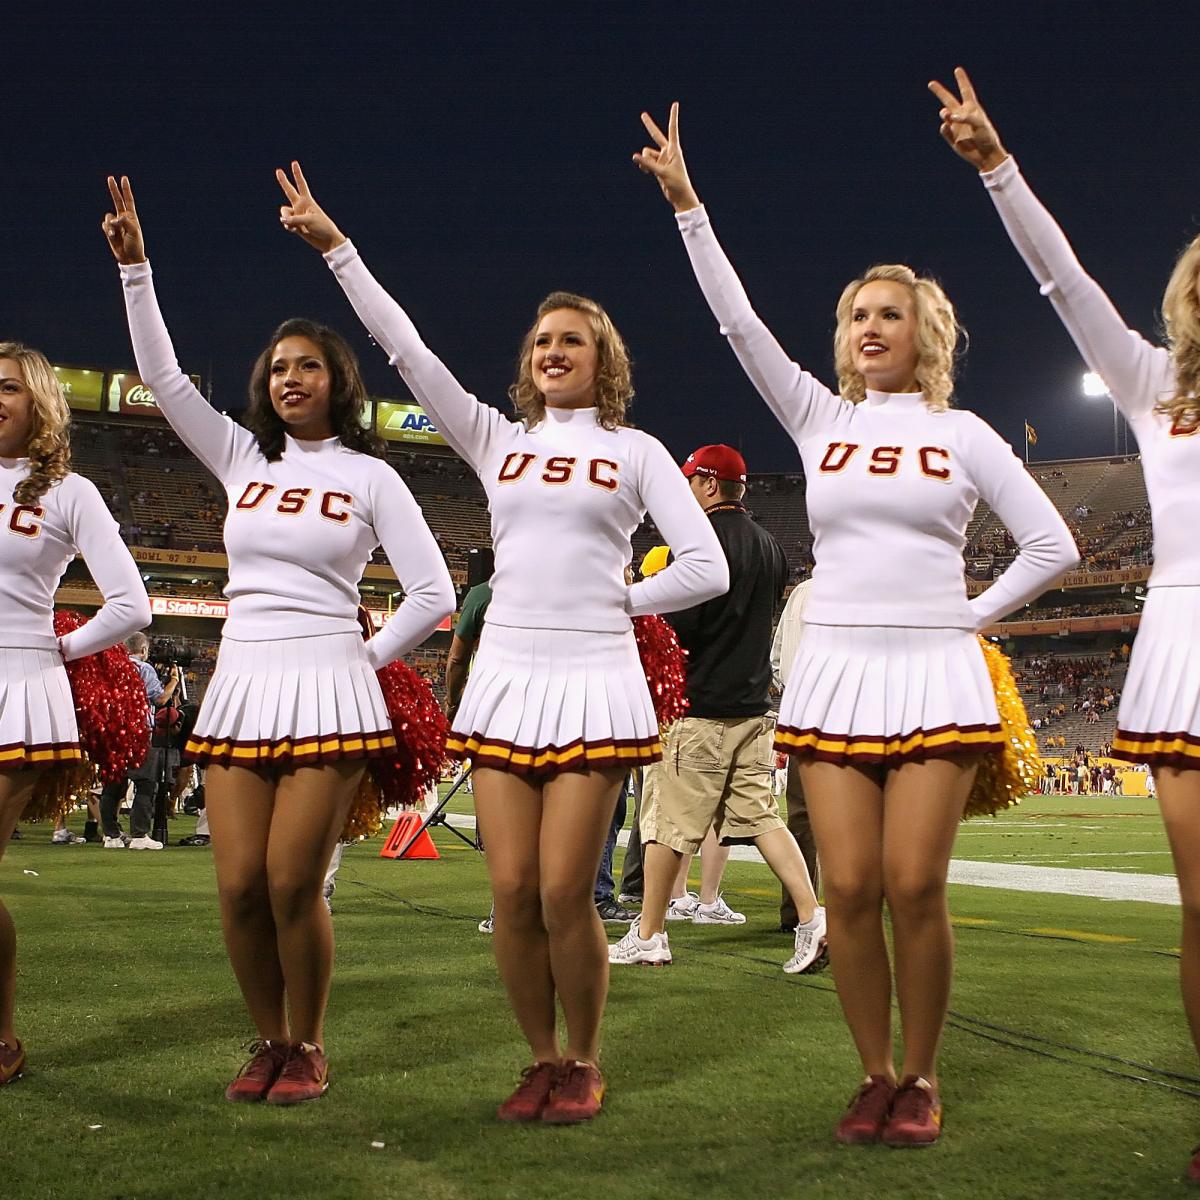 College Football Traditions Why Are Cheerleaders Still In Use